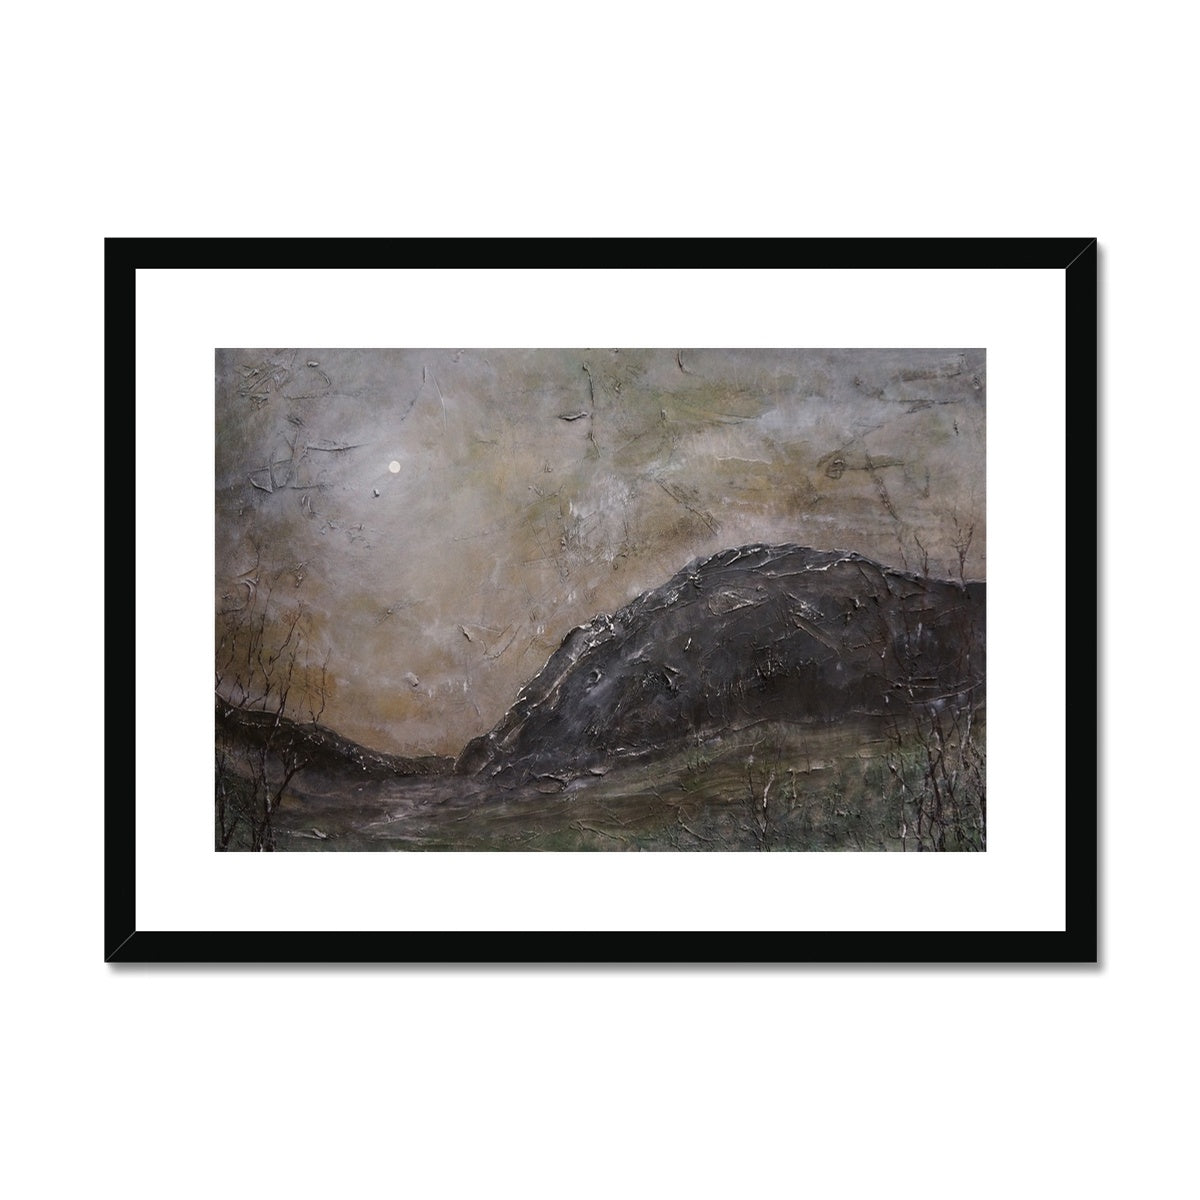 Glen Nevis Moonlight Painting | Framed & Mounted Prints From Scotland-Framed & Mounted Prints-Scottish Lochs & Mountains Art Gallery-A2 Landscape-Black Frame-Paintings, Prints, Homeware, Art Gifts From Scotland By Scottish Artist Kevin Hunter